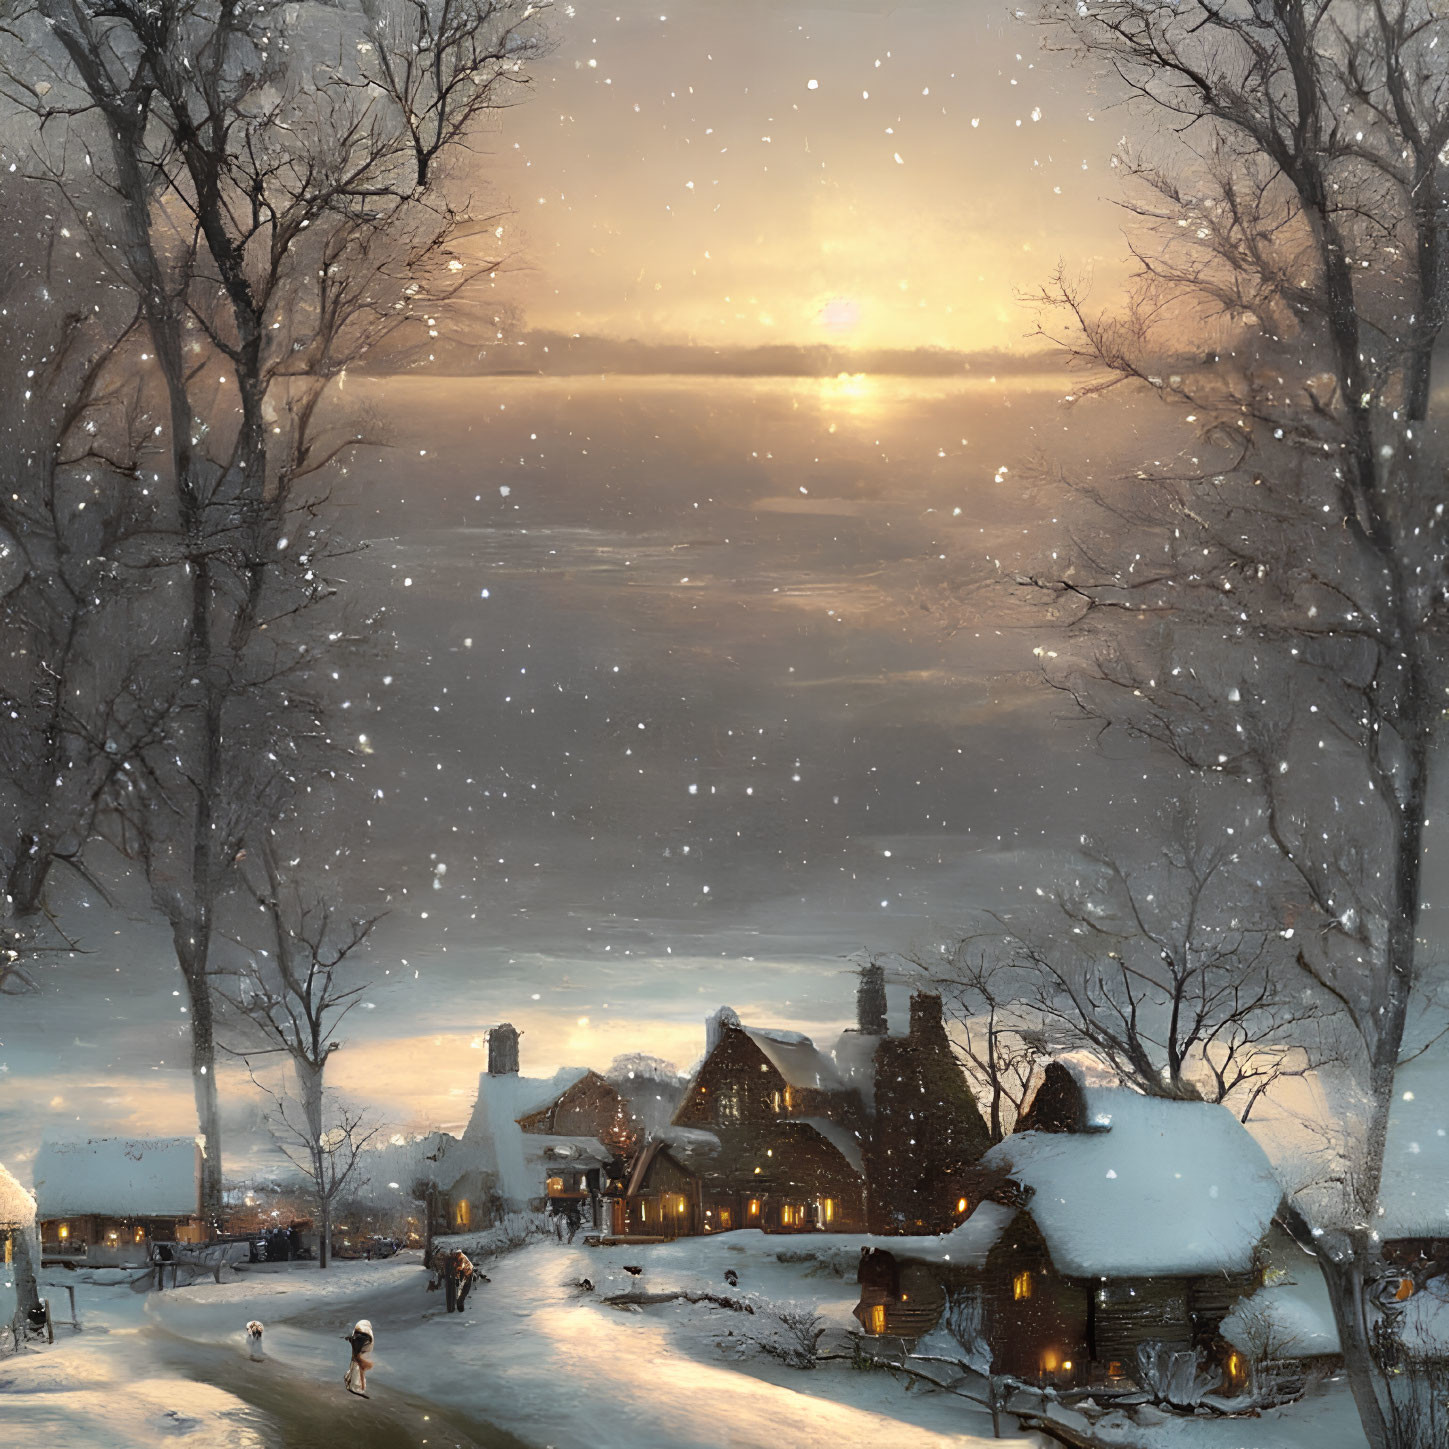 Snow-covered cottages, frozen lake, falling snowflakes: Tranquil winter dusk.